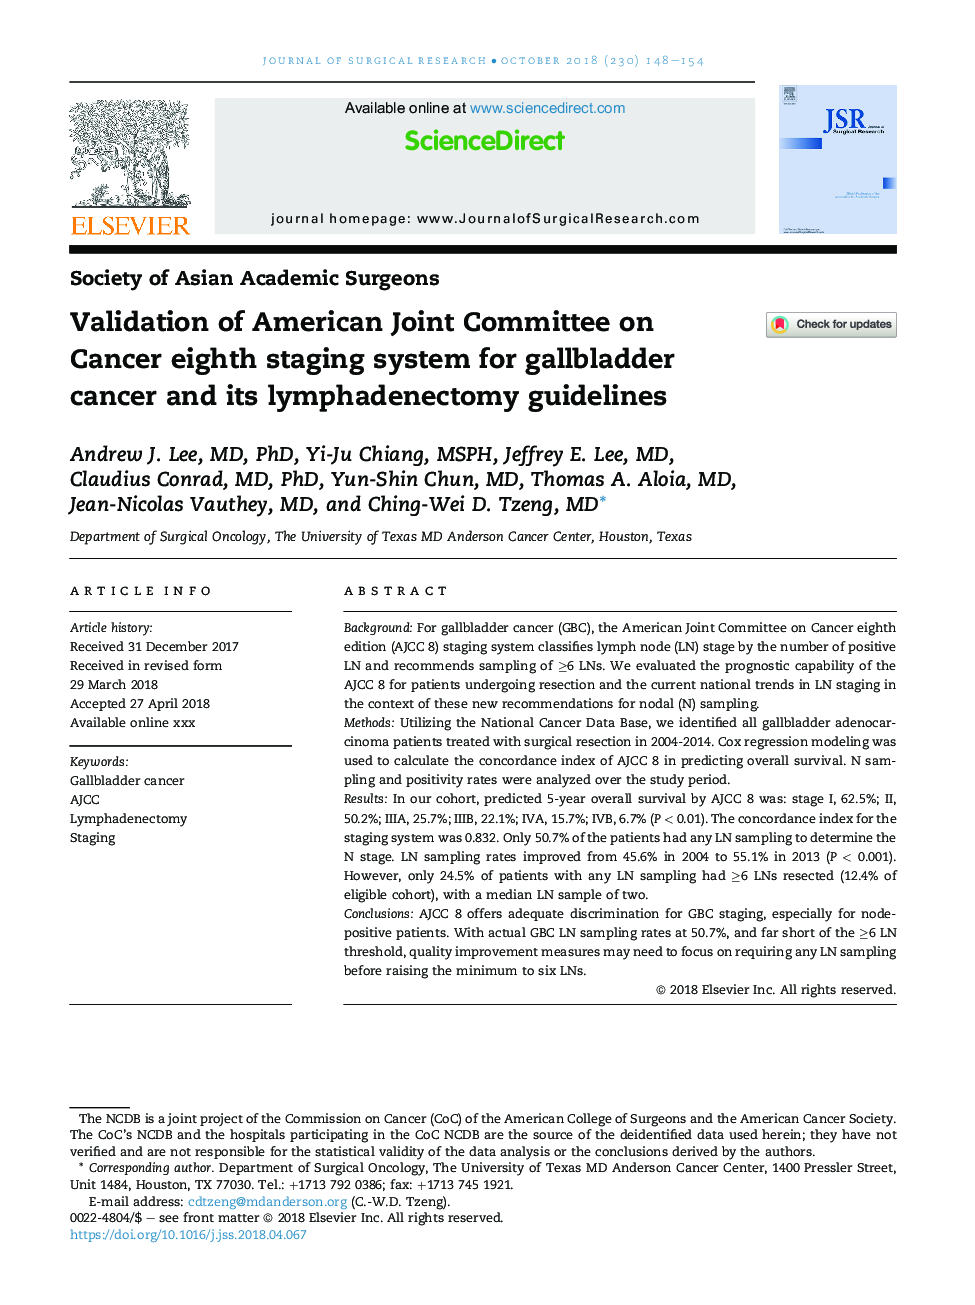 Validation of American Joint Committee on Cancer eighth staging system for gallbladder cancer and its lymphadenectomy guidelines